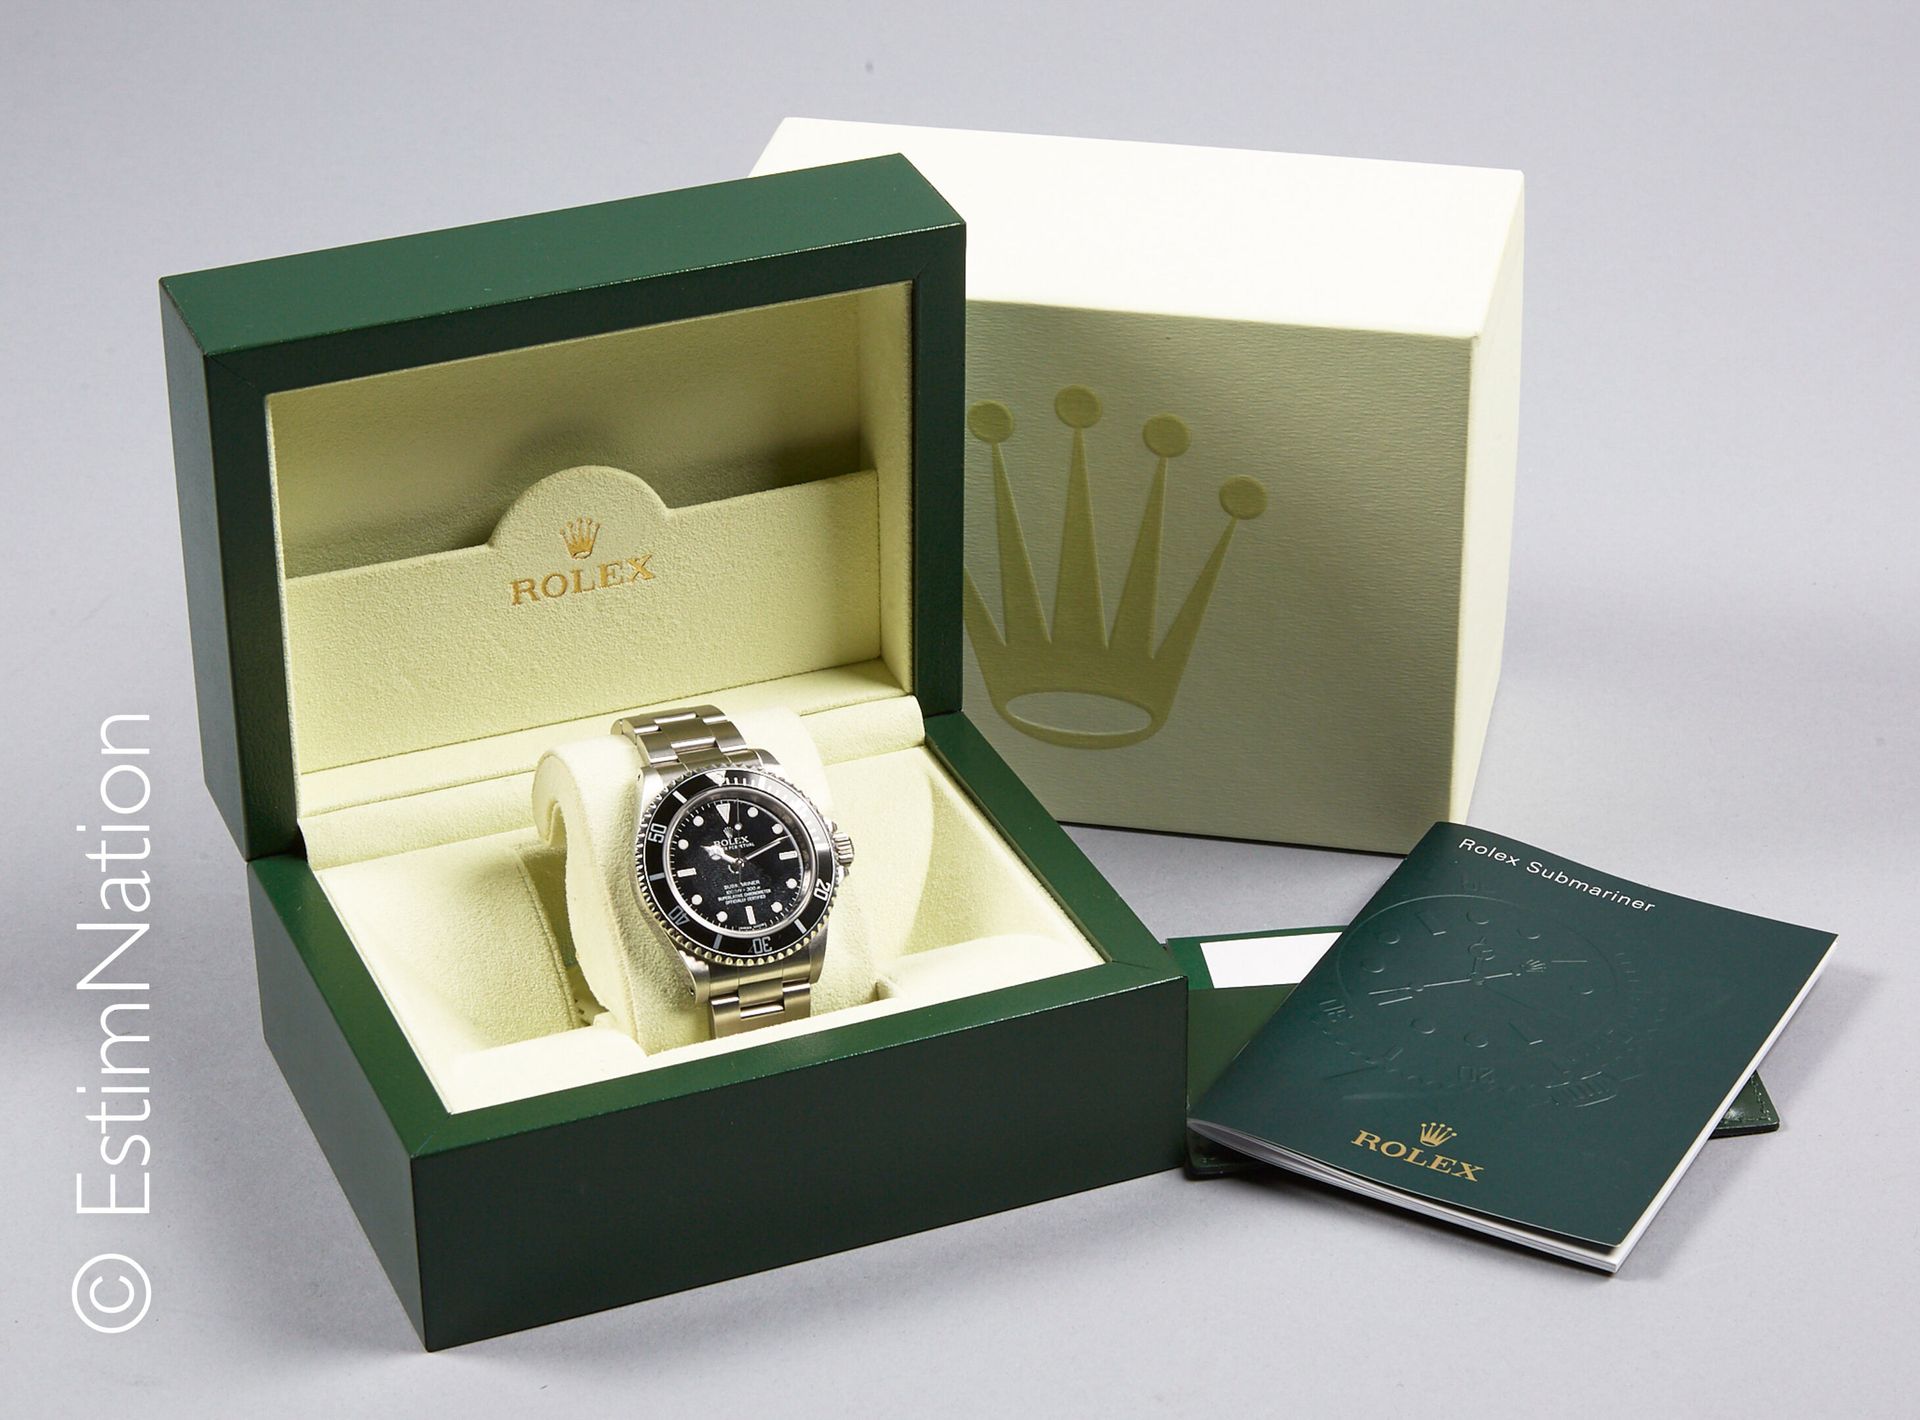 ROLEX SUBMARINER - ANNÉE 2012 
Rolex 





Oyster Perpetual Submariner





Refe&hellip;